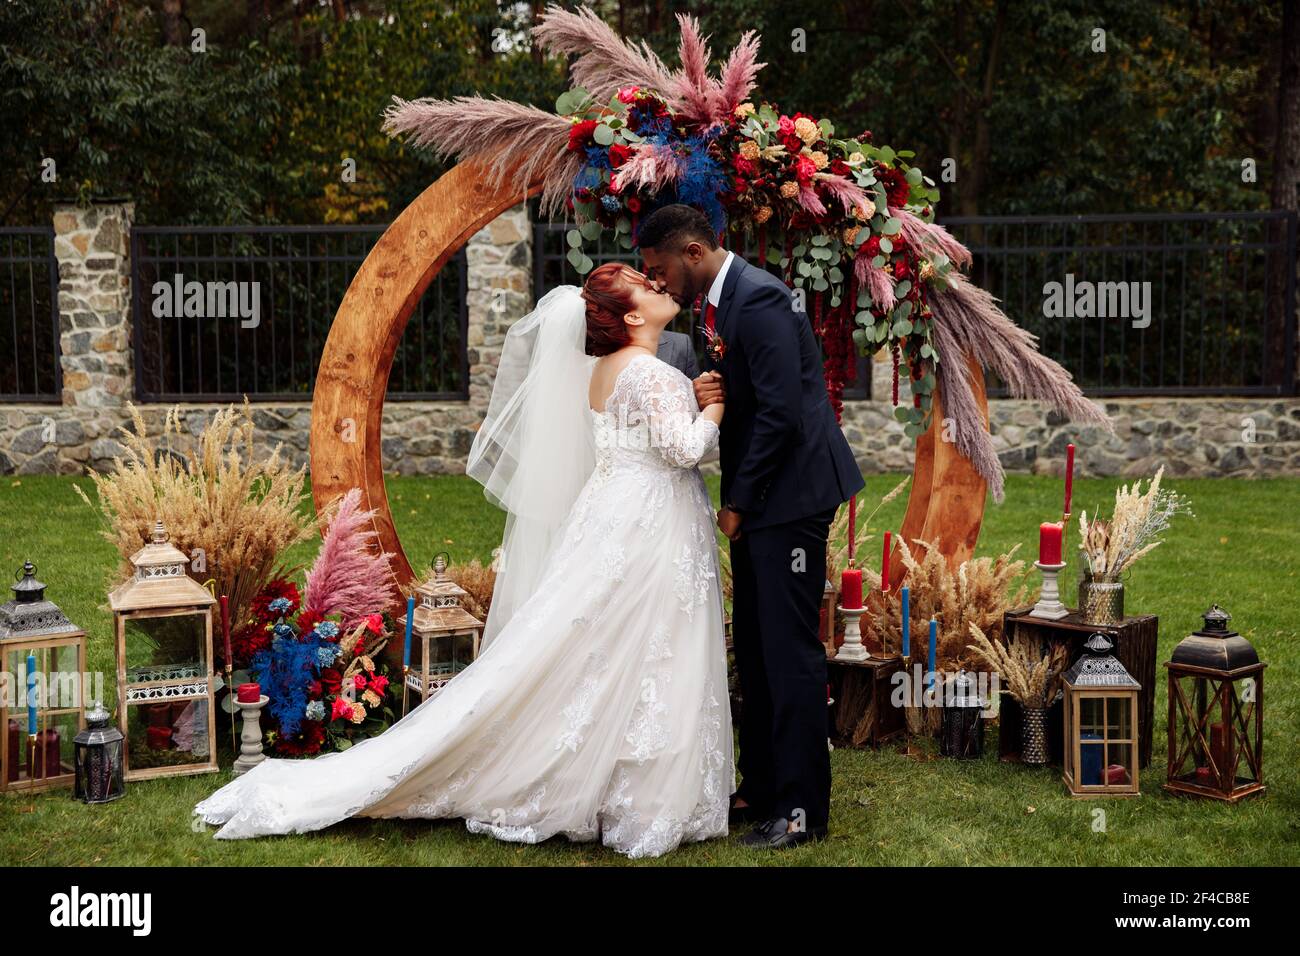 https://c8.alamy.com/comp/2F4CB8E/beautiful-white-woman-with-charming-african-american-man-stand-near-decorated-arch-adorable-couple-on-wedding-ceremony-attractive-groom-kiss-lovely-2F4CB8E.jpg